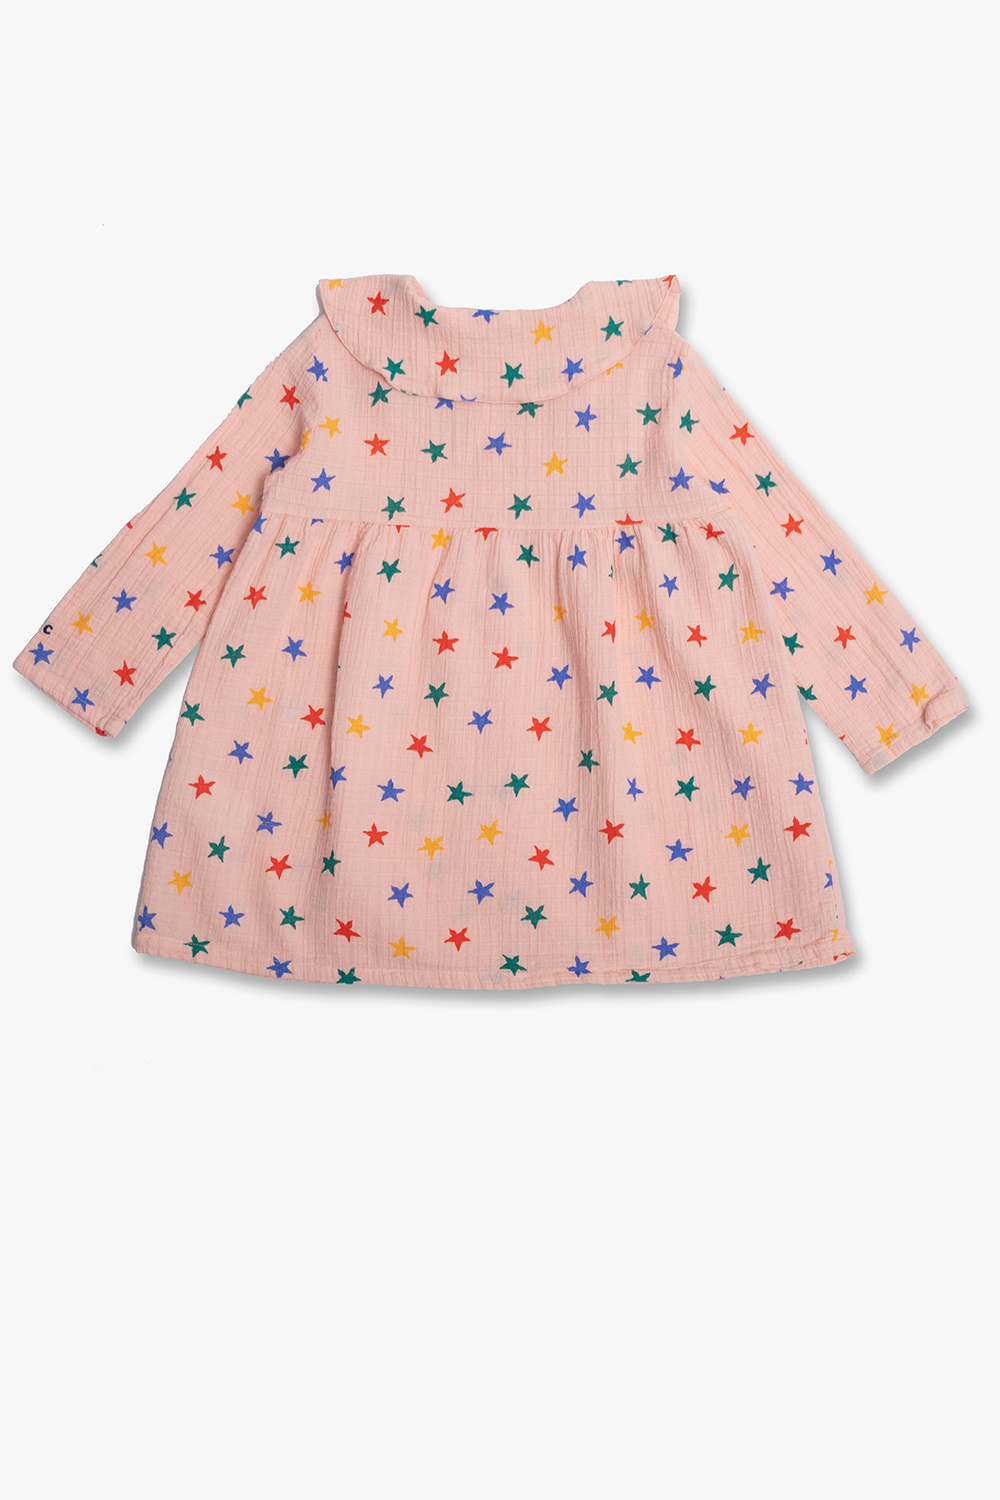 Bobo Choses Bit Disappointed With This Machine dress